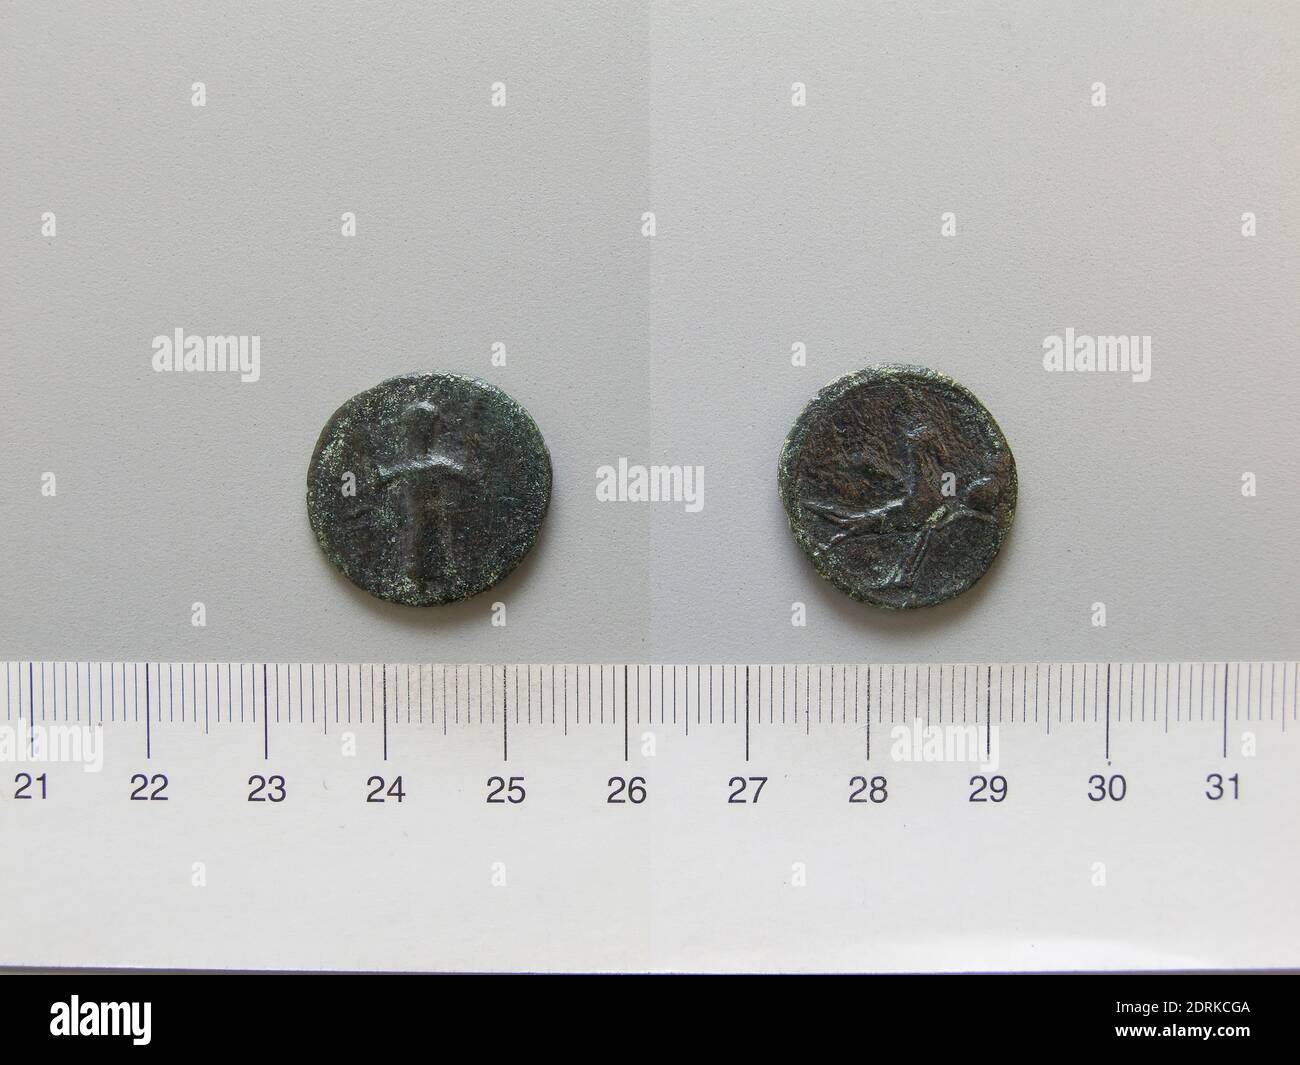 Ruler: Augustus, Emperor of Rome, 63 B.C.–A.D. 14, ruled 27 B.C.–A.D. 14, Ruler: Tiberius, Emperor of Rome, 42 B.C.–A.D. 37, Mint: Sabratha, Coin of Augustus, Emperor of Rome; Tiberius, Emperor of Rome from Sabratha, 27 B.C.–A.D. 37, Bronze, 4.905 g, 5:00, 20 mm, Made in Sabratha, Syrtica, Roman, 1st century B.C.–1st century A.D., Numismatics Stock Photo